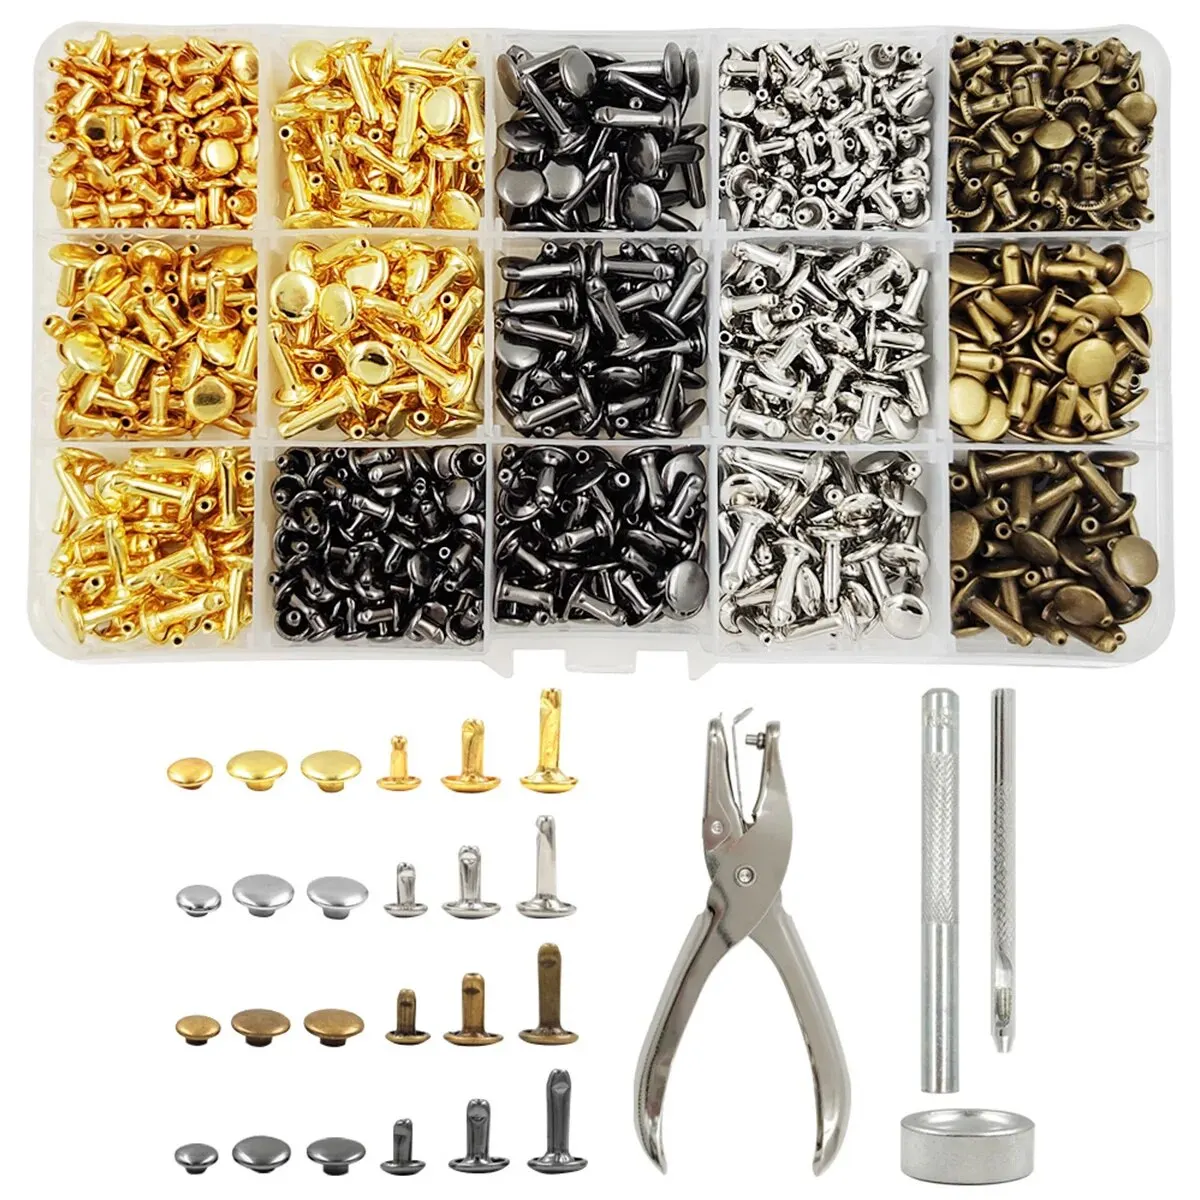 240/480Sets Metal Double Cap Rivet Stud Round Nail Spike With Tool Kits For Leathercraft DIY Shoes Bag Belt Clothing Accessories